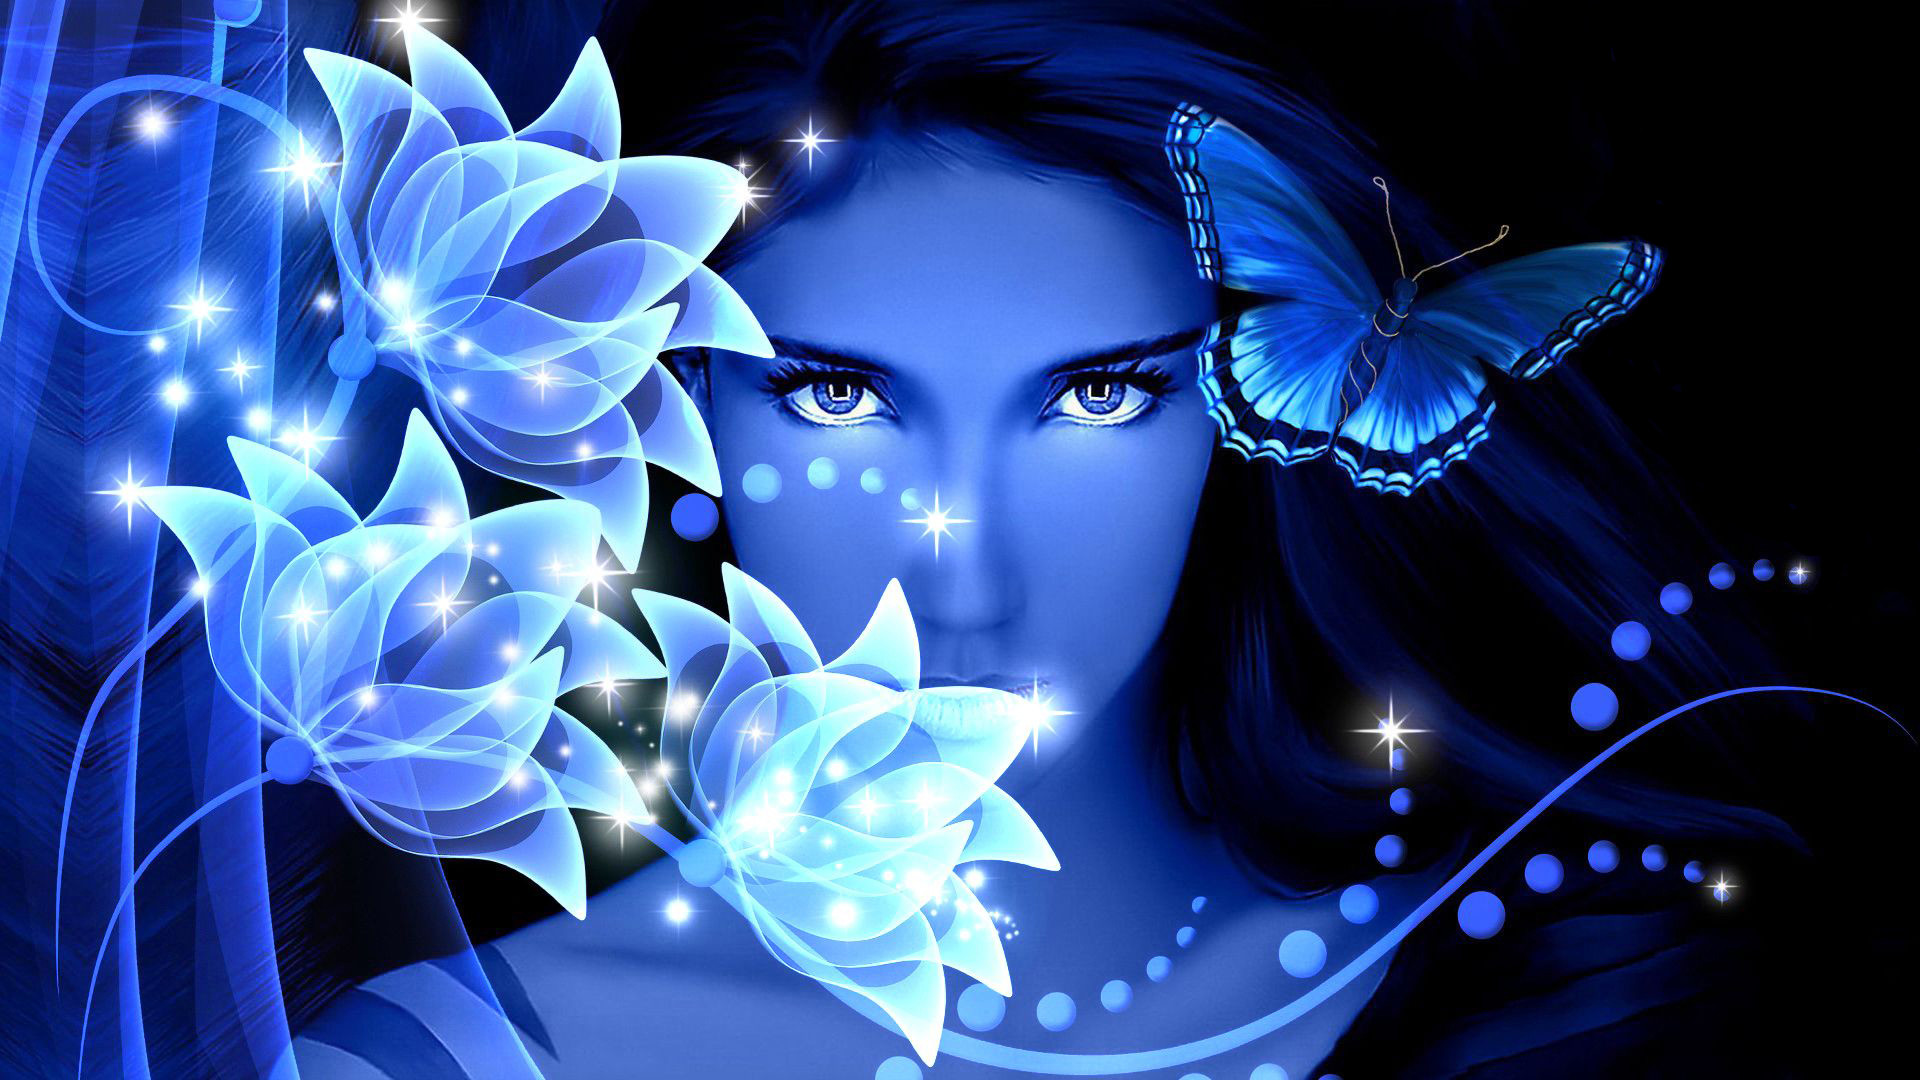 1920x1080 blue butterfly on white stones desktop background wallpapers hd.